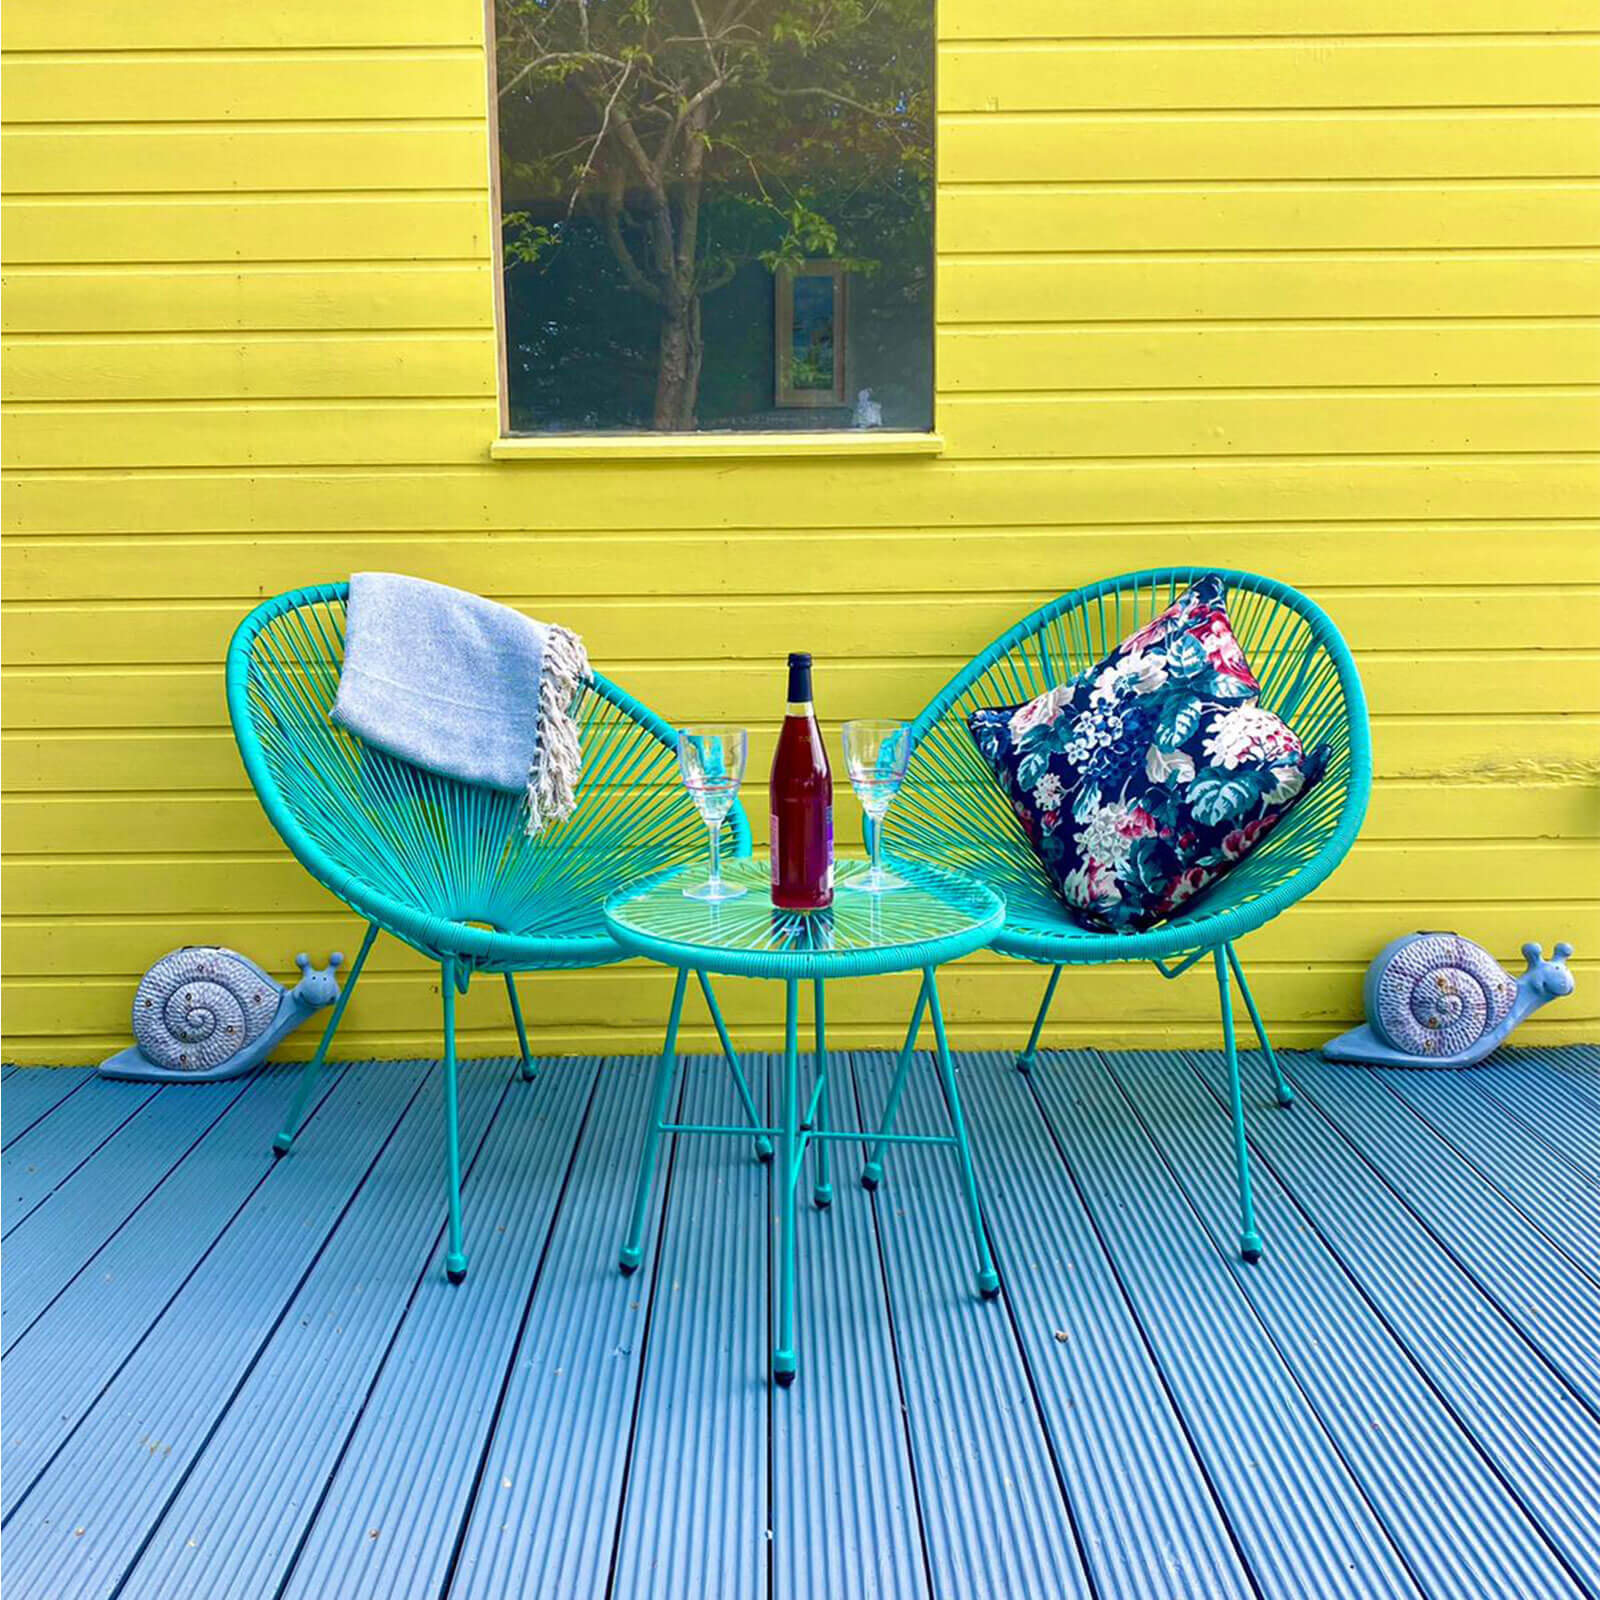 emerald green bright rattan egg chair bistro set with 2 rattan egg chairs and one bistro coffee table with glass table top sitting on a decking in a garden with summer house